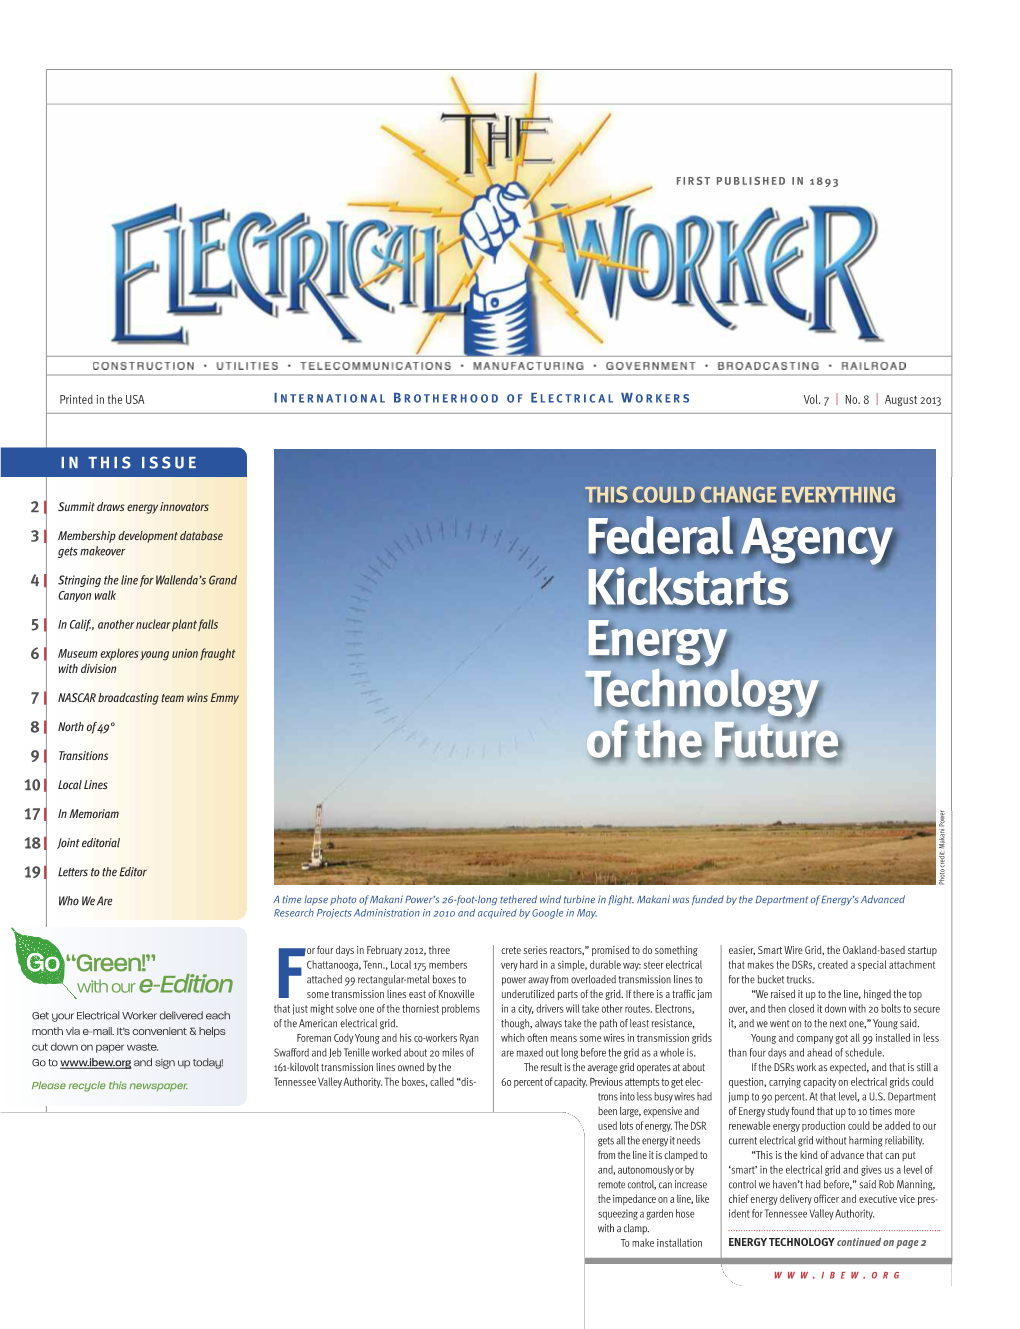 Federal Agency Kickstarts Energy Technology of the Future